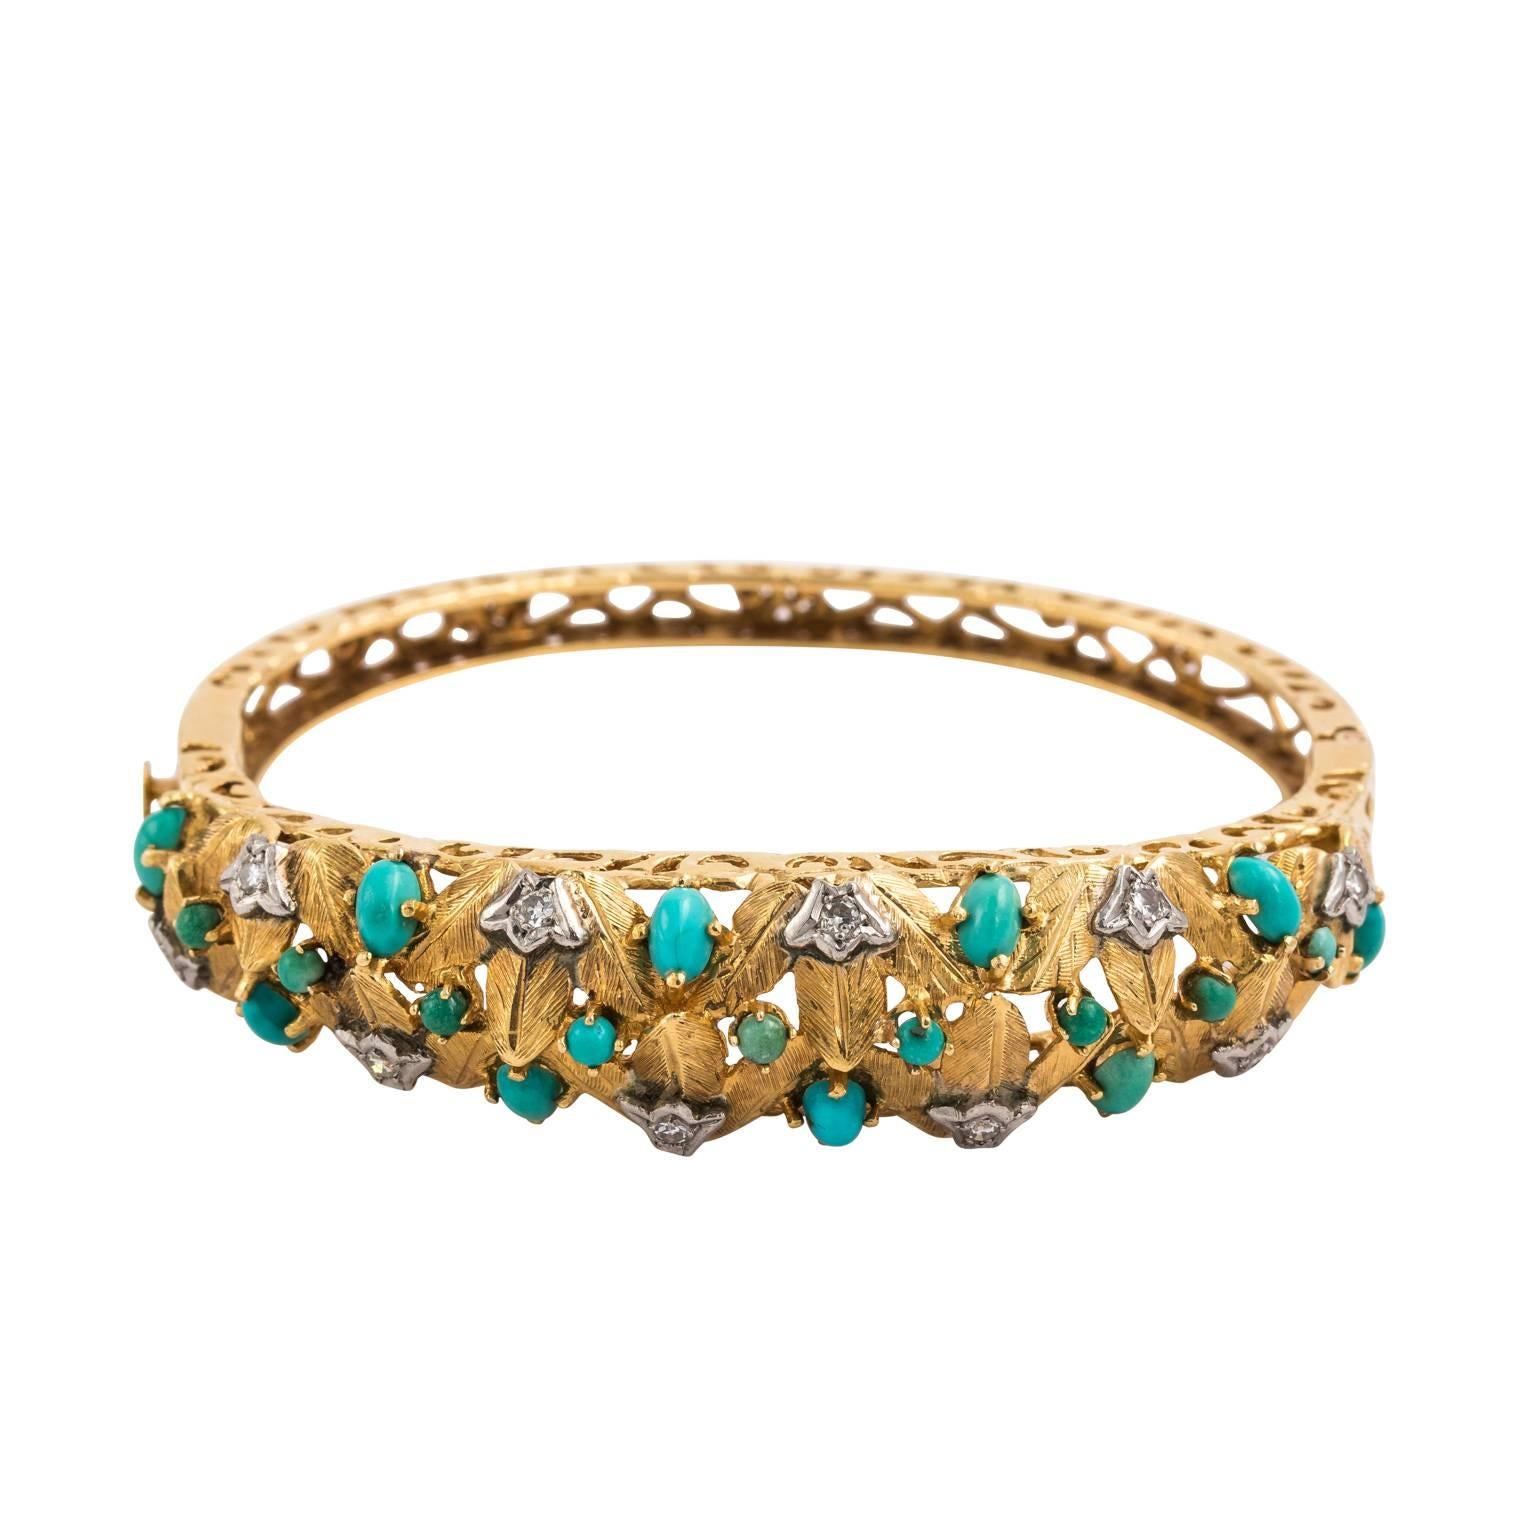 Gold and Turquoise Cuff Bracelet